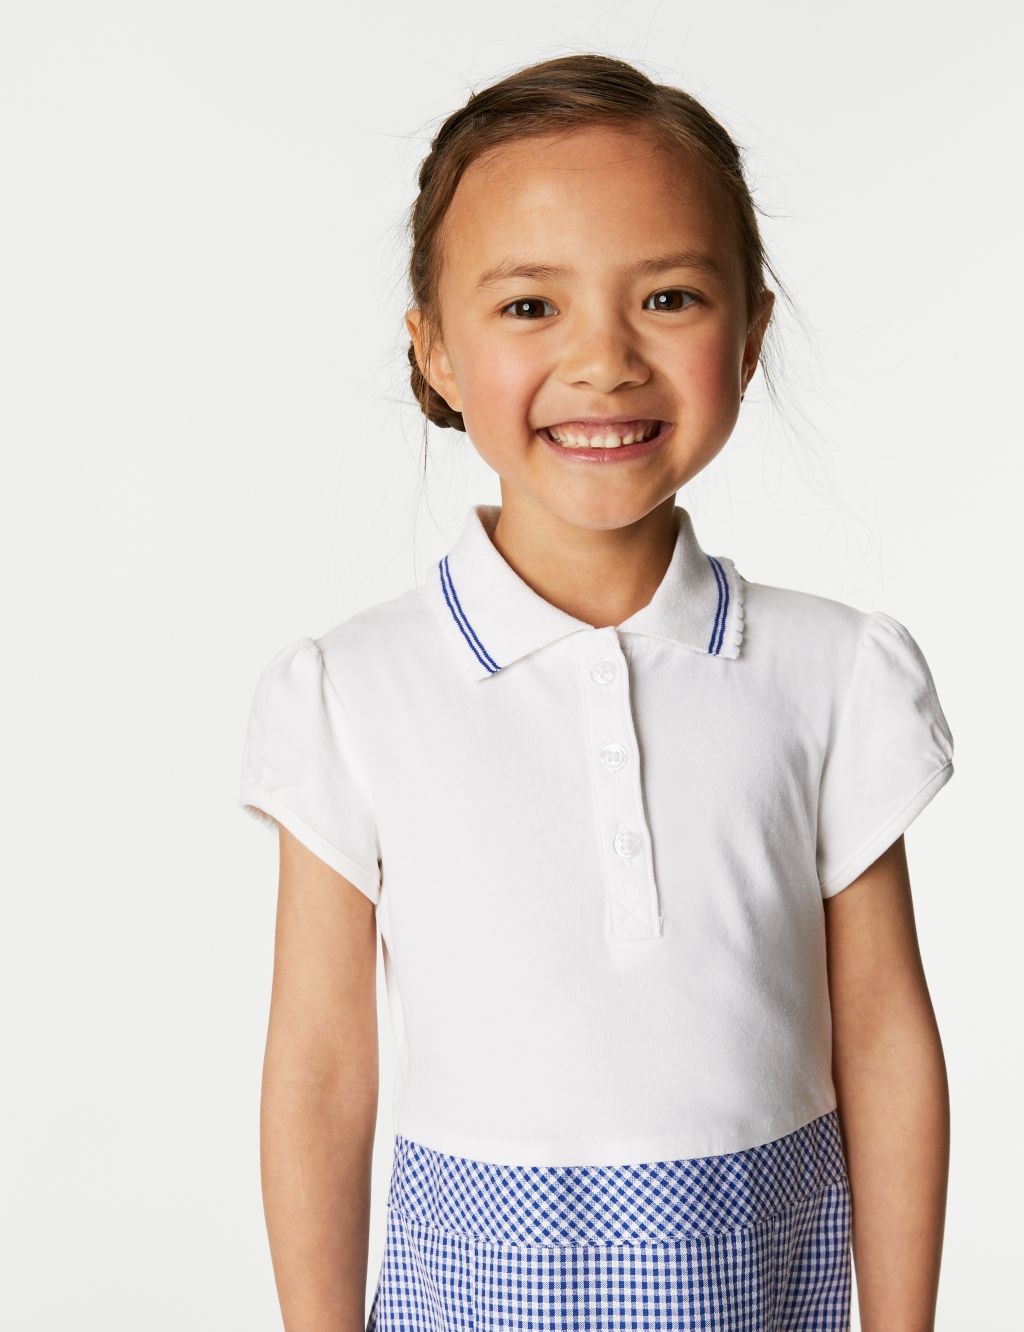 Girls' 2 in 1 Gingham Pleated School Dress (2-14 Yrs) image 2